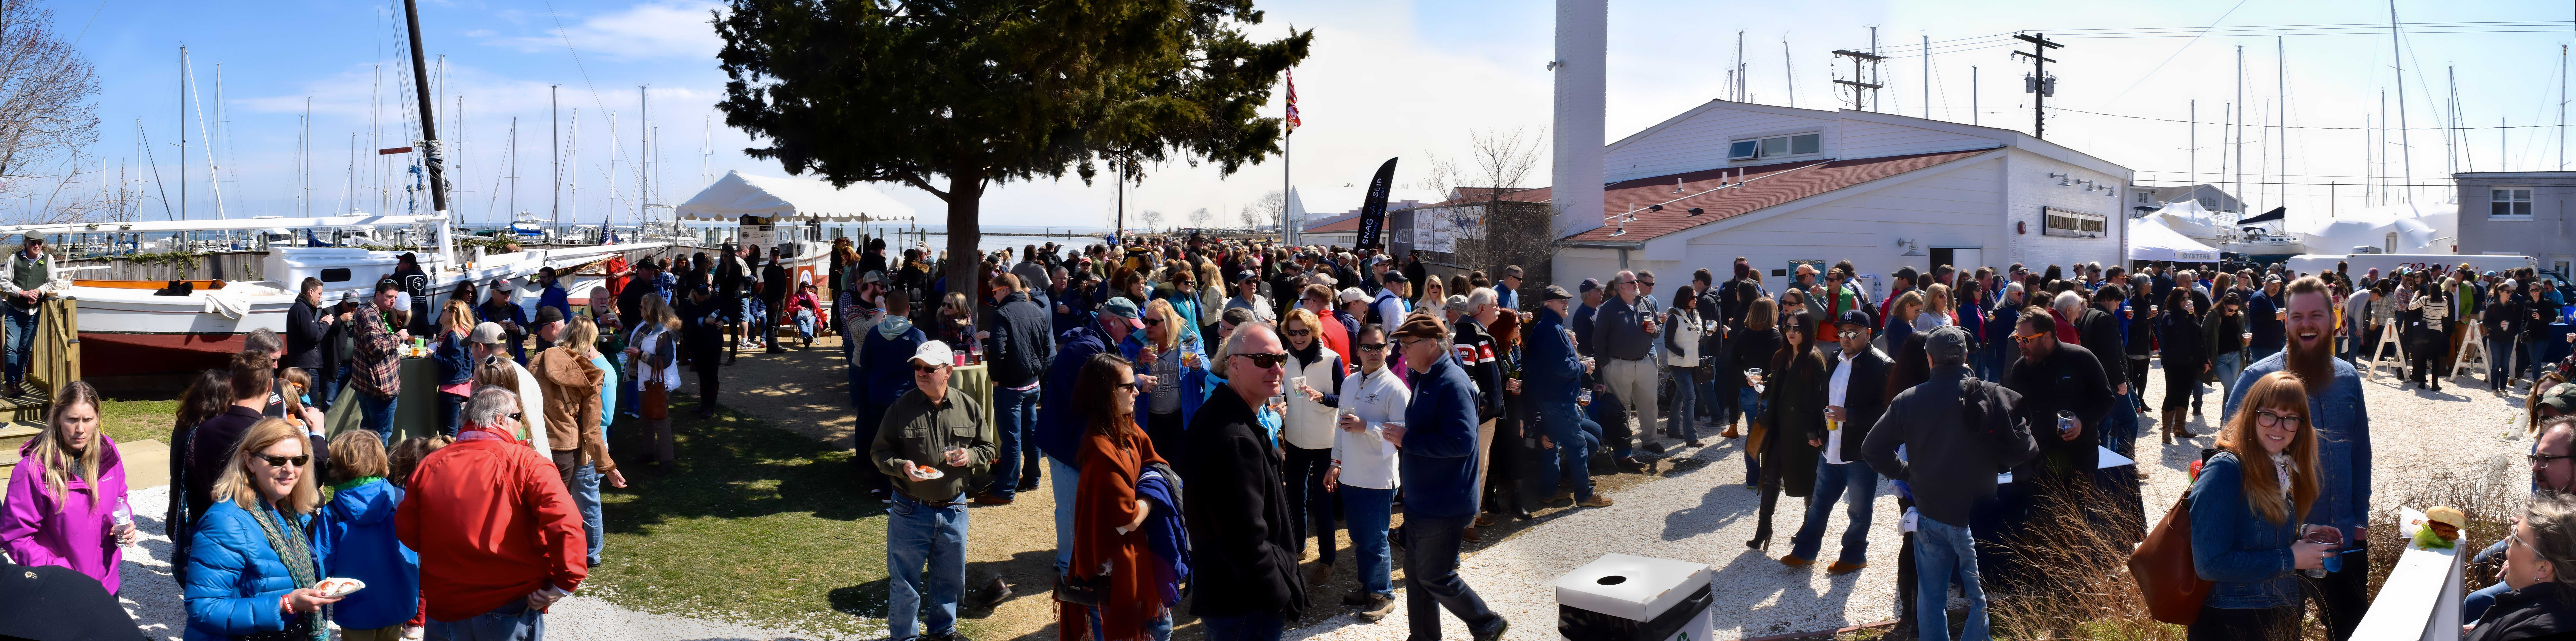 Annapolis Oyster Roast Crowd Picture